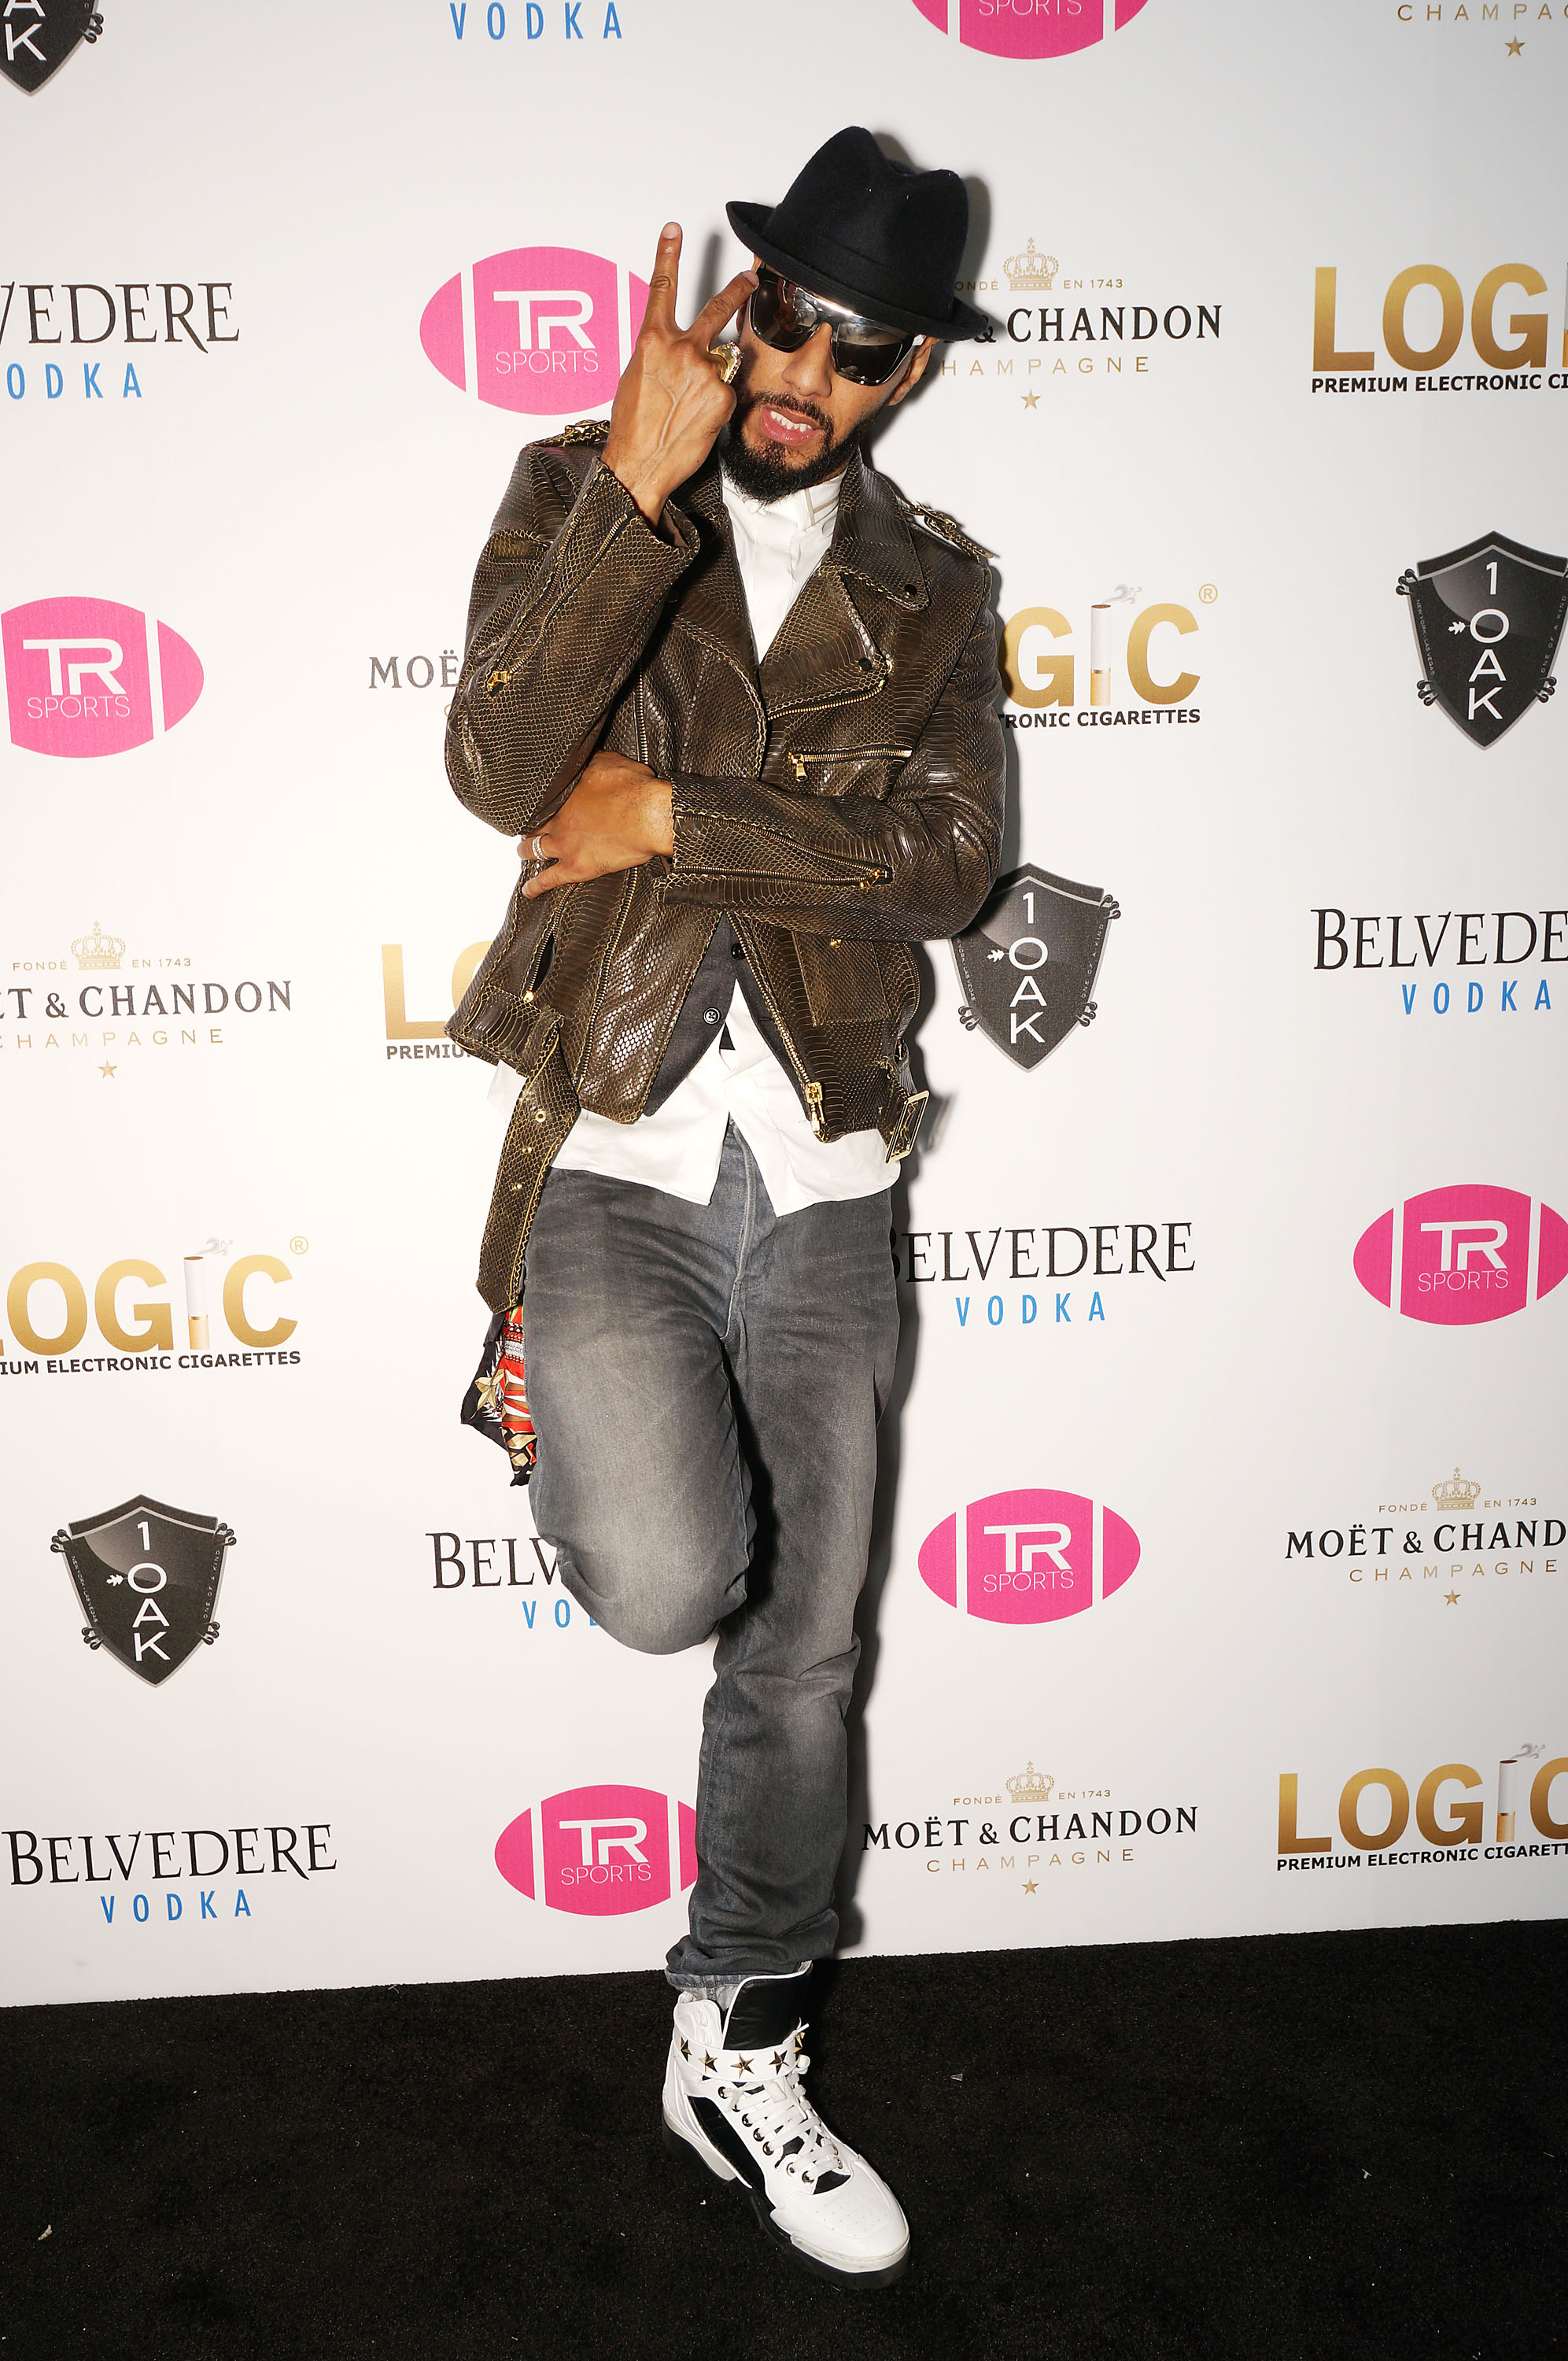 attends 1 OAK New Orleans Presented By LOGIC Electronic Cigarettes at Jax Brewery on February 2, 2013 in New Orleans, Louisiana.